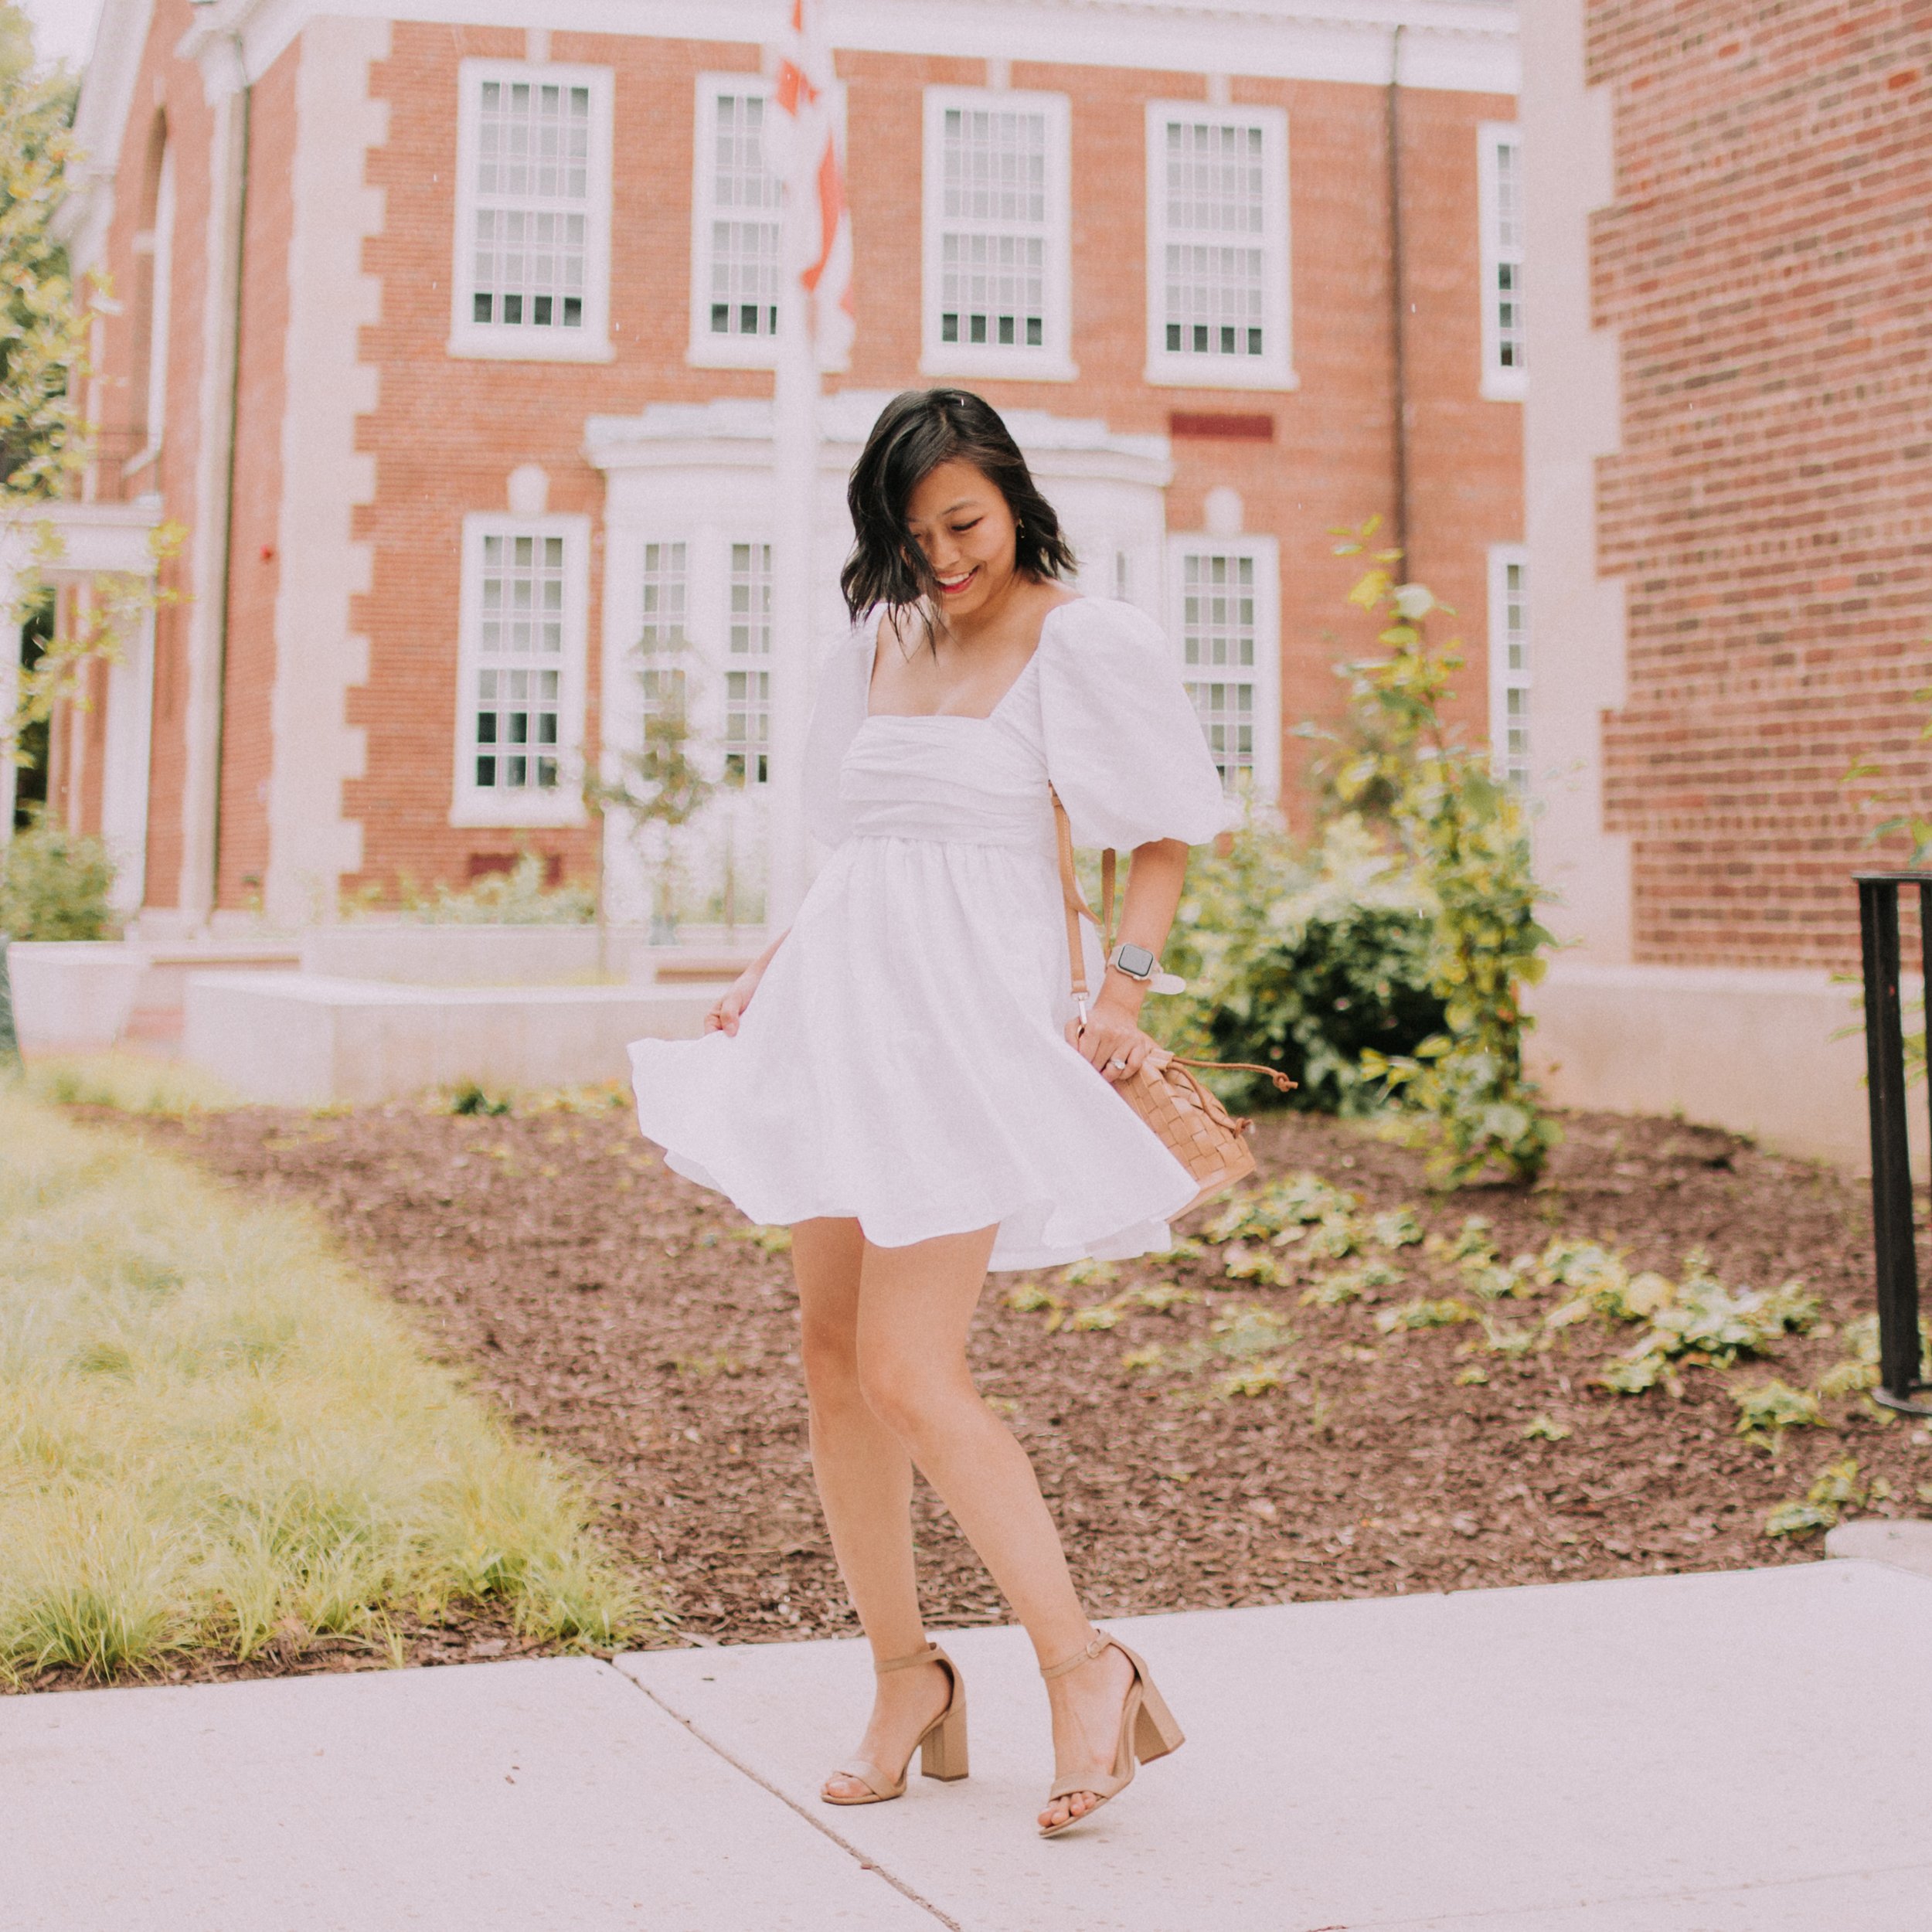 Little White Dress | Ruched Bodice Mini Dress and Woven Bag — Coffee, Prose, Clothes